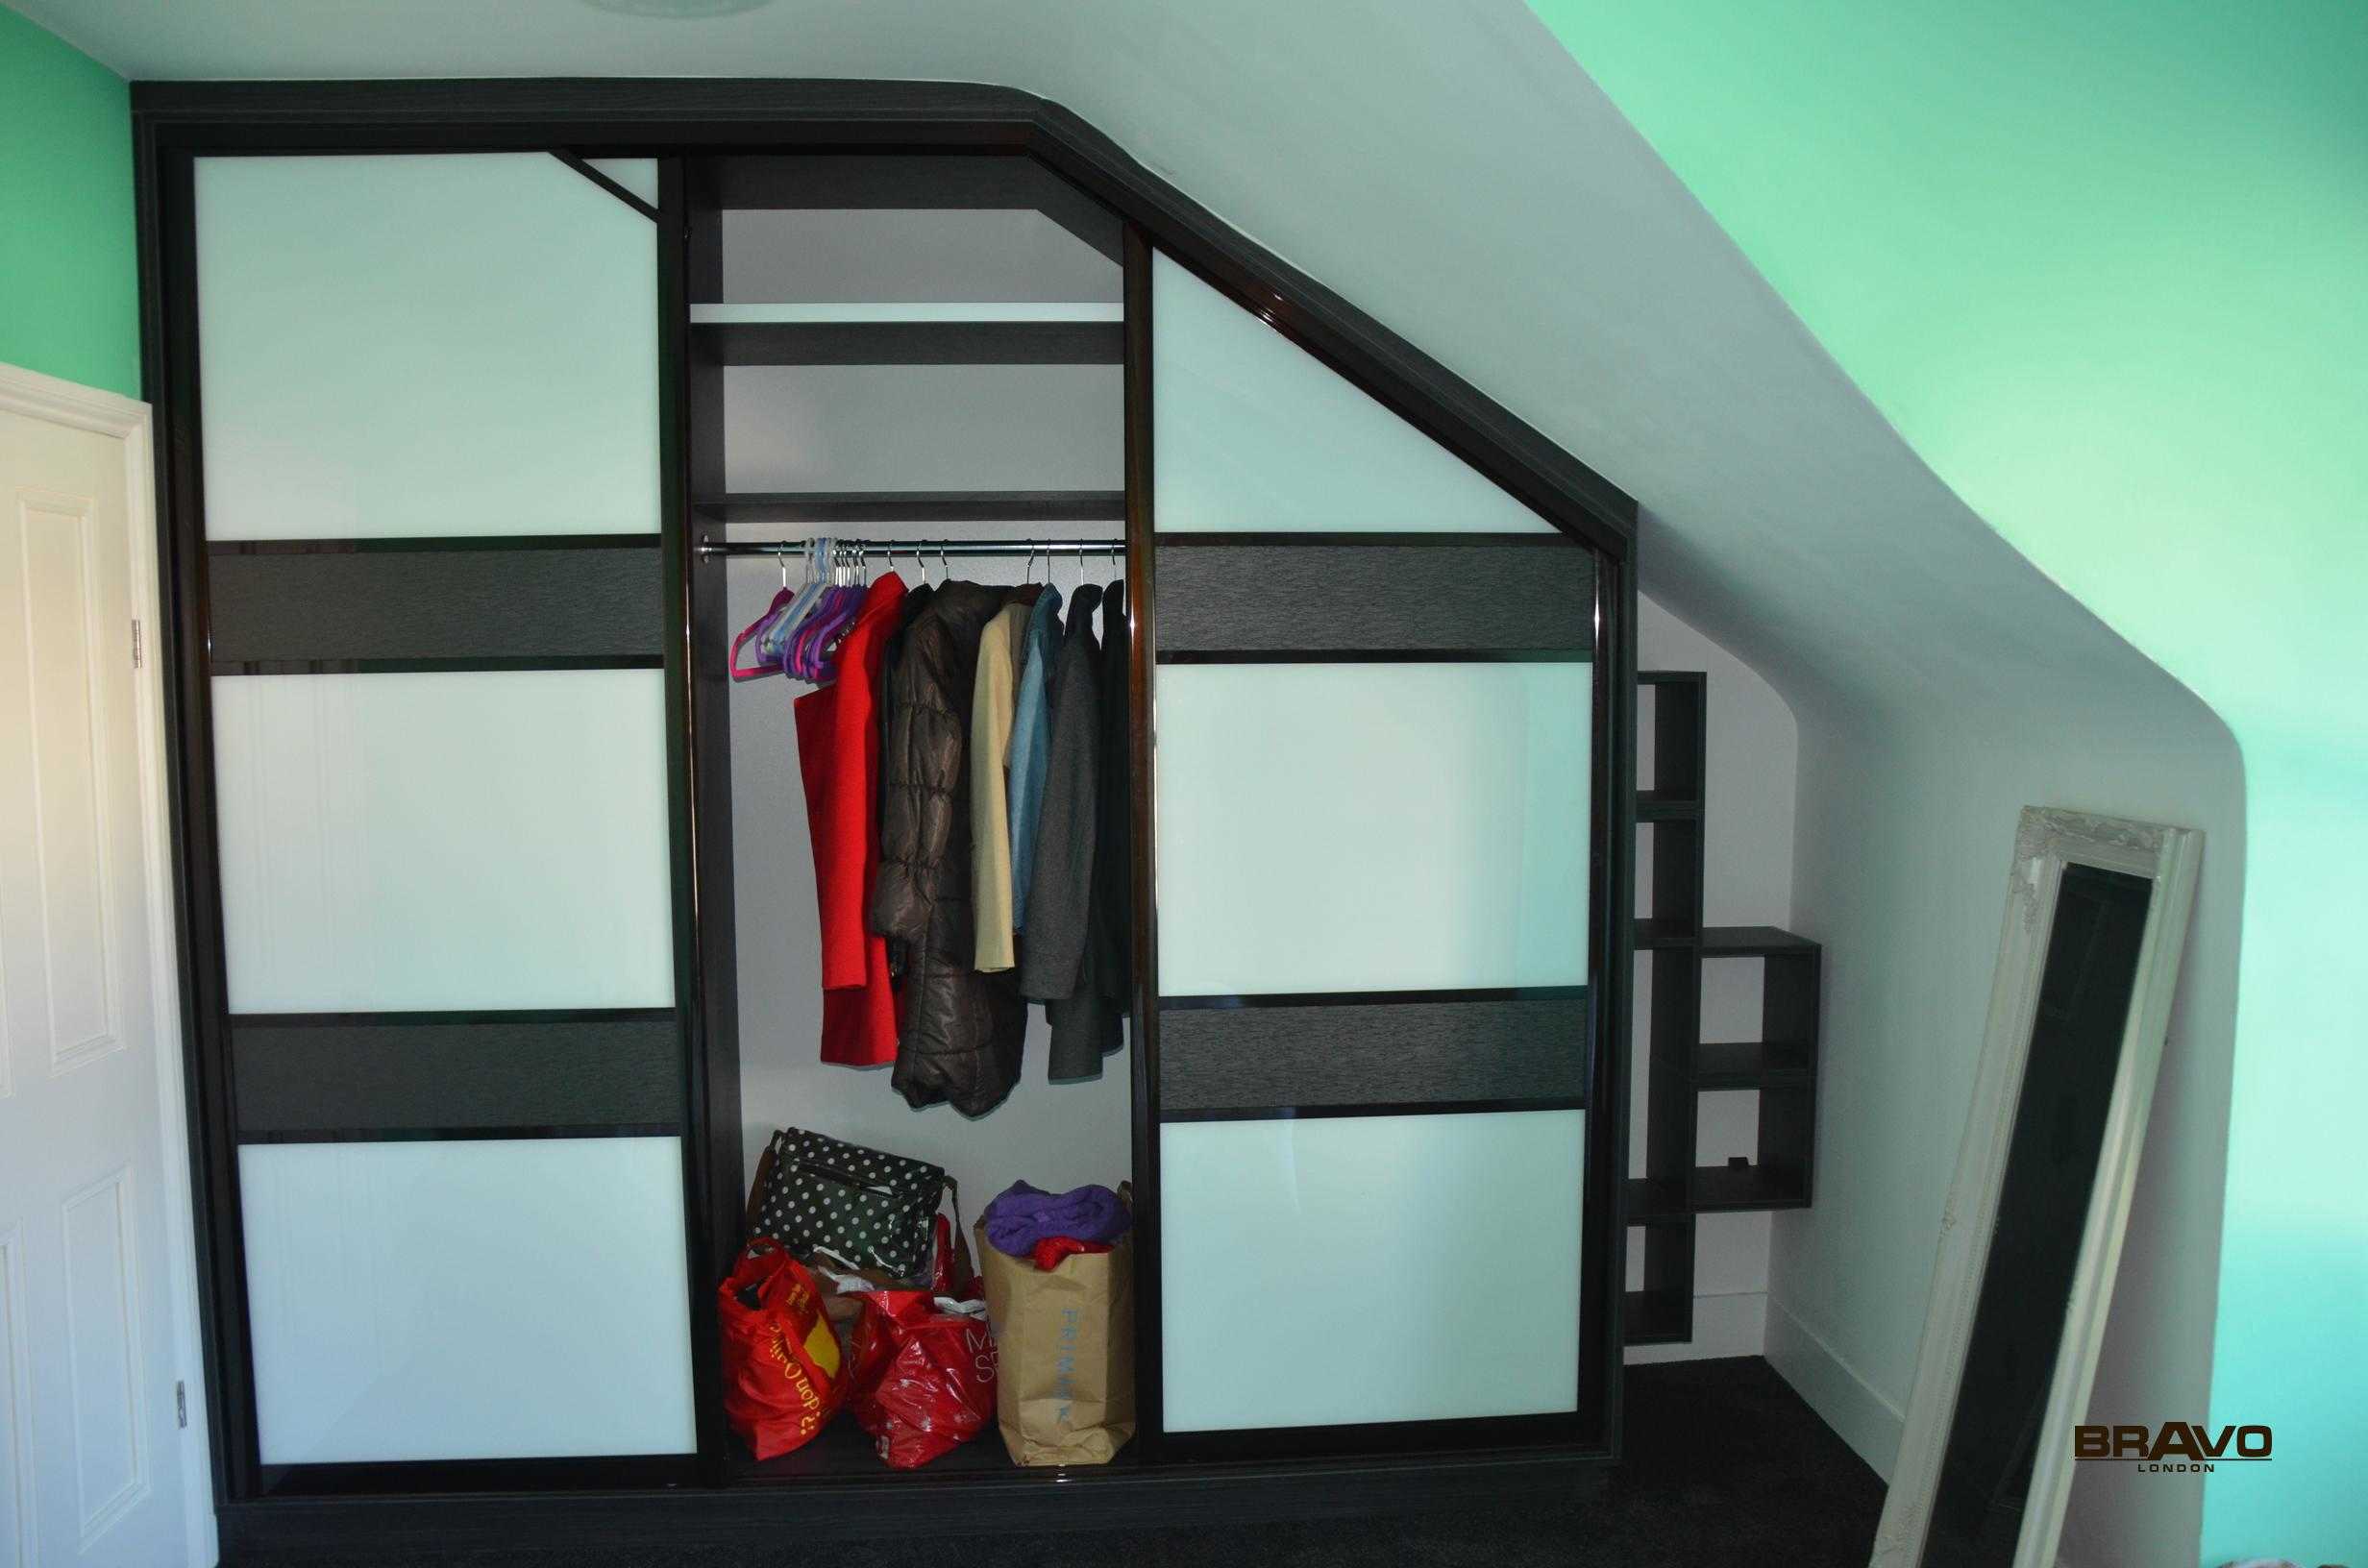 A large black-framed fitted wardrobe is installed into a slanted ceiling space, with partially open sliding doors revealing clothes and bags inside. The room has a green wall and wooden flooring.